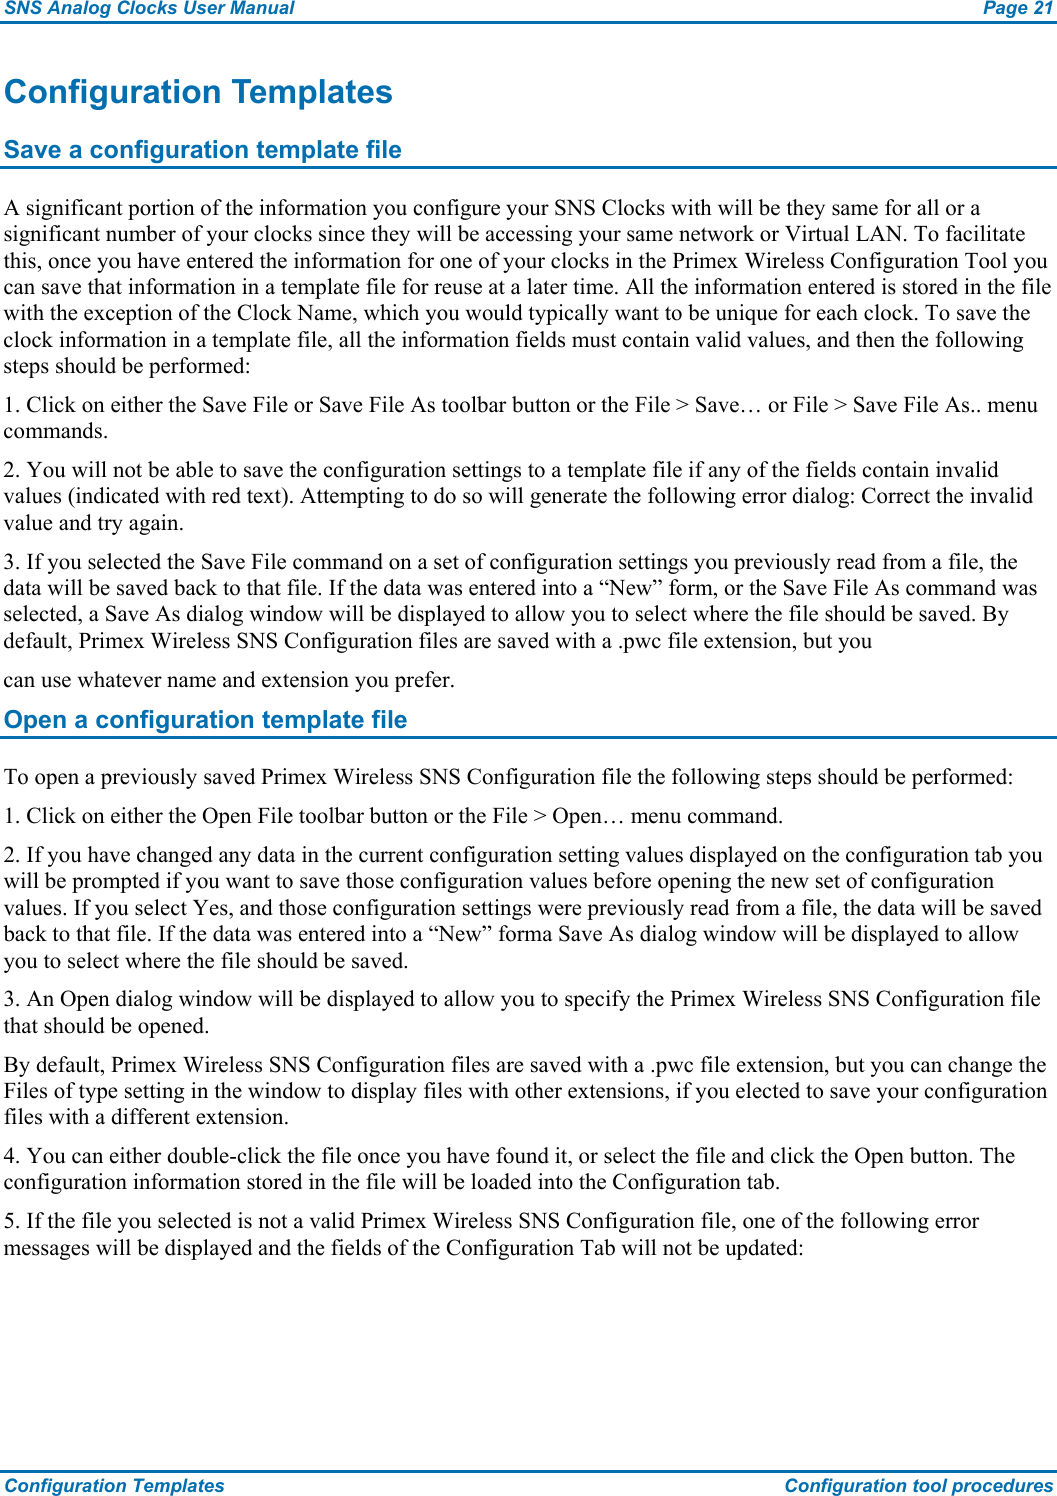 SNS Analog Clocks User Manual  Page 21 Configuration Templates  Configuration tool procedures Configuration Templates Save a configuration template file A significant portion of the information you configure your SNS Clocks with will be they same for all or a significant number of your clocks since they will be accessing your same network or Virtual LAN. To facilitate this, once you have entered the information for one of your clocks in the Primex Wireless Configuration Tool you can save that information in a template file for reuse at a later time. All the information entered is stored in the file with the exception of the Clock Name, which you would typically want to be unique for each clock. To save the clock information in a template file, all the information fields must contain valid values, and then the following steps should be performed: 1. Click on either the Save File or Save File As toolbar button or the File &gt; Save… or File &gt; Save File As.. menu commands. 2. You will not be able to save the configuration settings to a template file if any of the fields contain invalid values (indicated with red text). Attempting to do so will generate the following error dialog: Correct the invalid value and try again. 3. If you selected the Save File command on a set of configuration settings you previously read from a file, the data will be saved back to that file. If the data was entered into a “New” form, or the Save File As command was selected, a Save As dialog window will be displayed to allow you to select where the file should be saved. By default, Primex Wireless SNS Configuration files are saved with a .pwc file extension, but you can use whatever name and extension you prefer. Open a configuration template file To open a previously saved Primex Wireless SNS Configuration file the following steps should be performed: 1. Click on either the Open File toolbar button or the File &gt; Open… menu command. 2. If you have changed any data in the current configuration setting values displayed on the configuration tab you will be prompted if you want to save those configuration values before opening the new set of configuration values. If you select Yes, and those configuration settings were previously read from a file, the data will be saved back to that file. If the data was entered into a “New” forma Save As dialog window will be displayed to allow you to select where the file should be saved. 3. An Open dialog window will be displayed to allow you to specify the Primex Wireless SNS Configuration file that should be opened. By default, Primex Wireless SNS Configuration files are saved with a .pwc file extension, but you can change the Files of type setting in the window to display files with other extensions, if you elected to save your configuration files with a different extension. 4. You can either double-click the file once you have found it, or select the file and click the Open button. The configuration information stored in the file will be loaded into the Configuration tab. 5. If the file you selected is not a valid Primex Wireless SNS Configuration file, one of the following error messages will be displayed and the fields of the Configuration Tab will not be updated: 